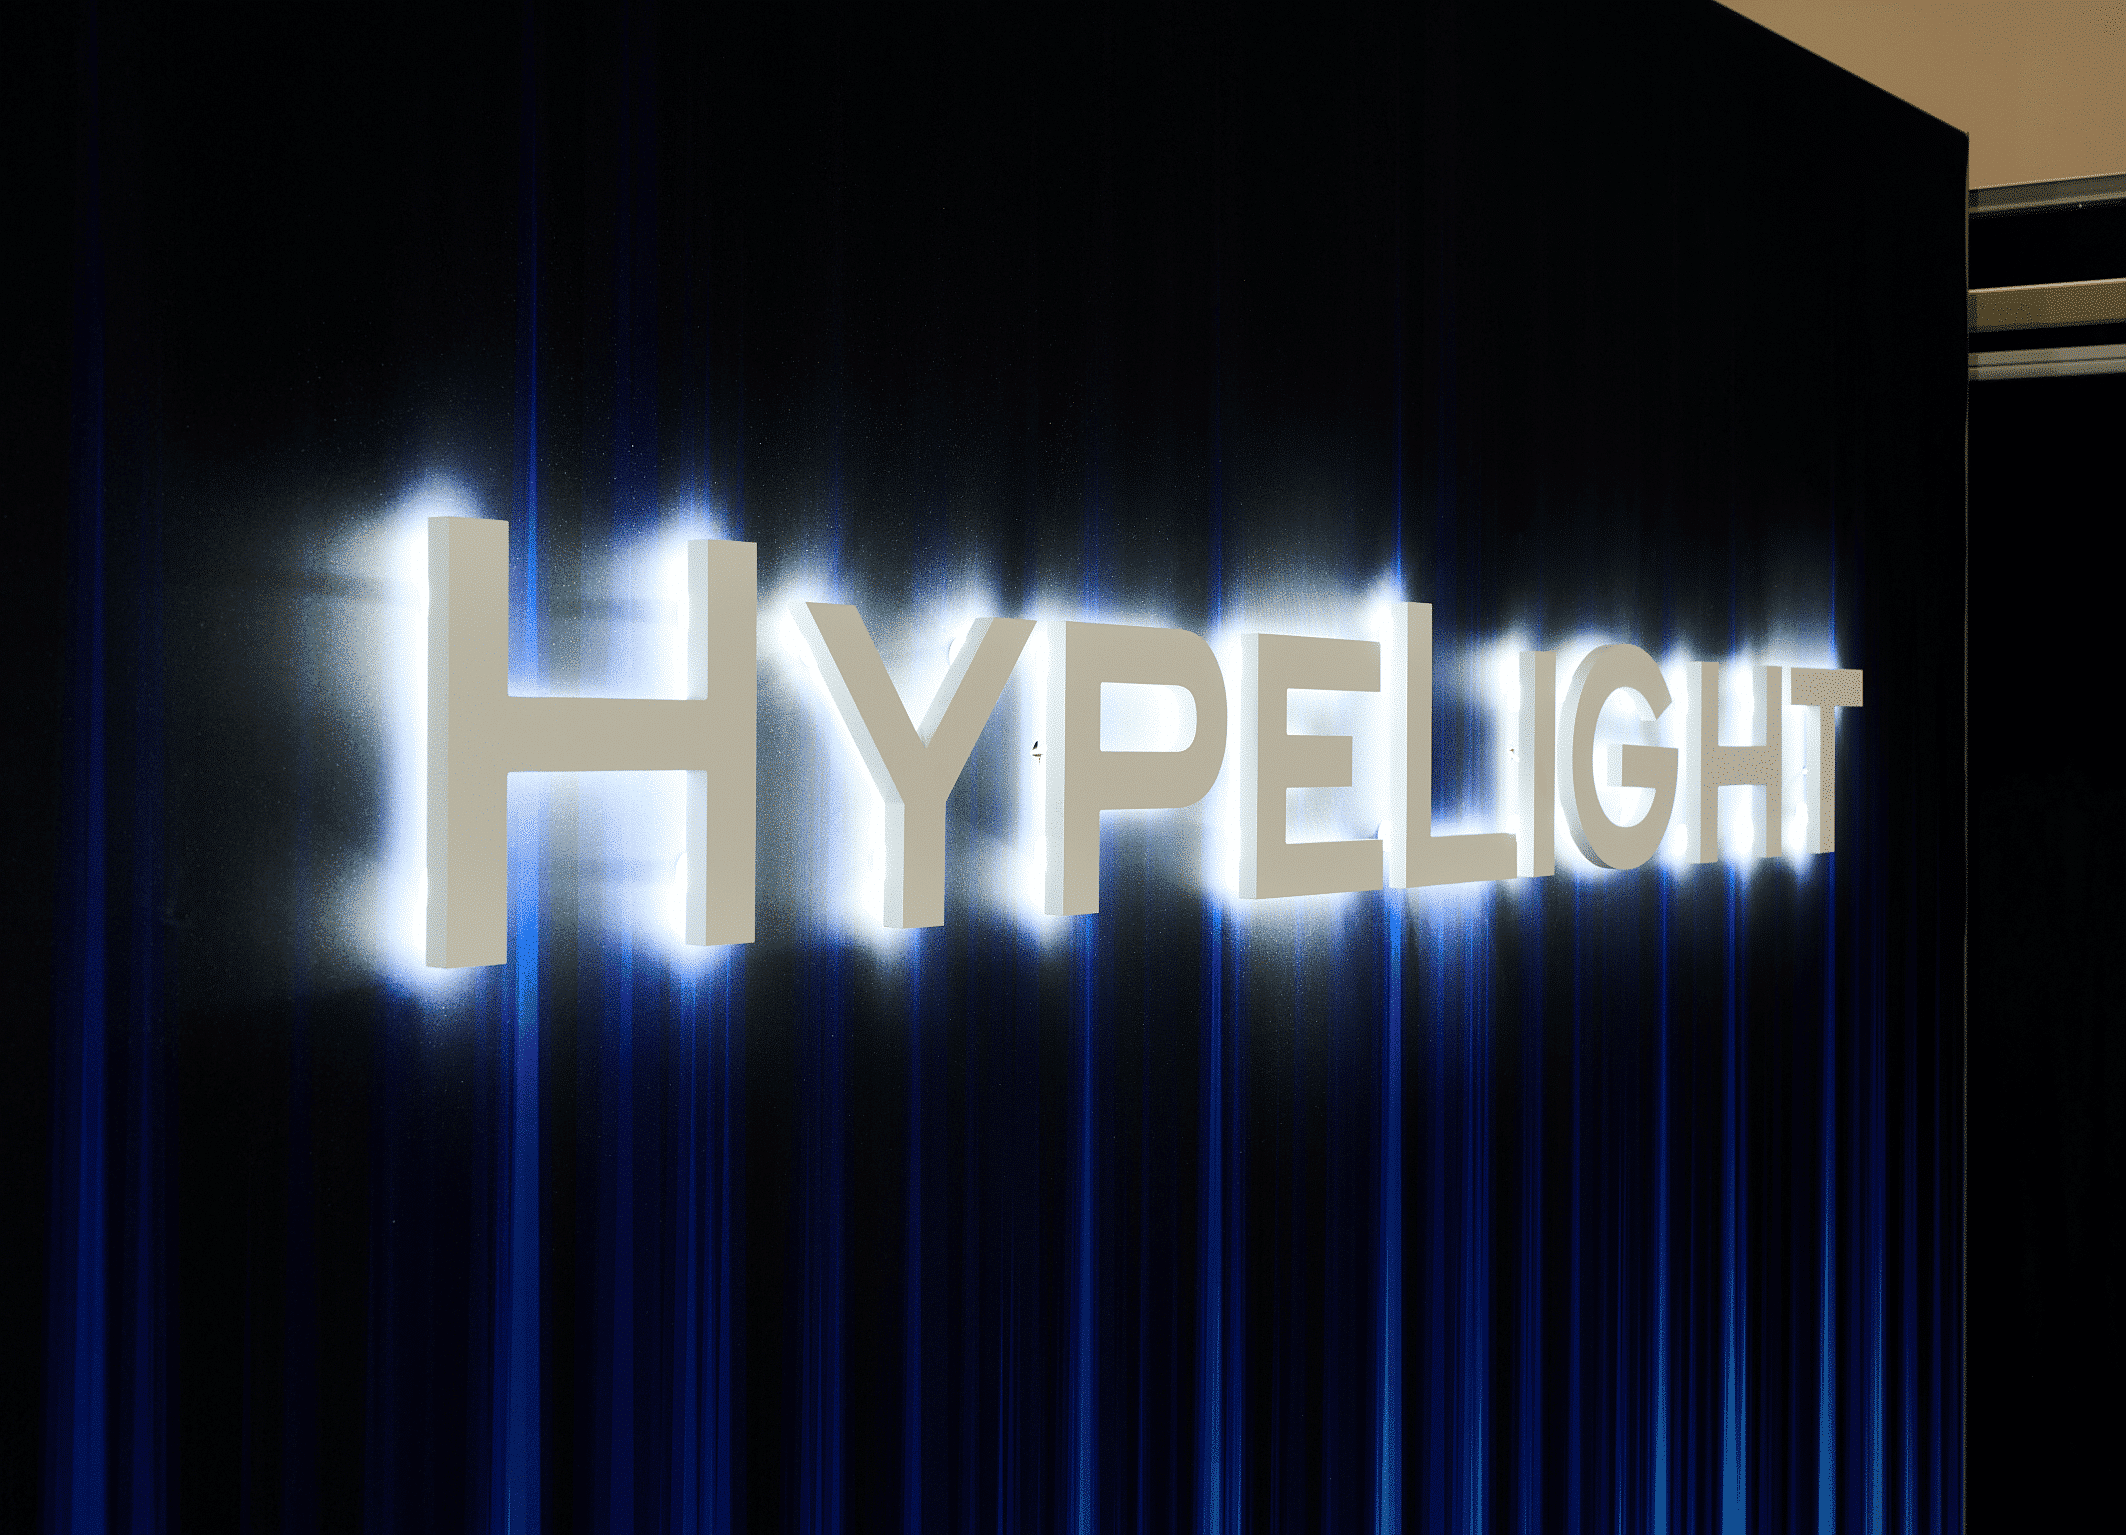 HYPELIGHT ILLUMINATED DIMENSIONAL LETTERS